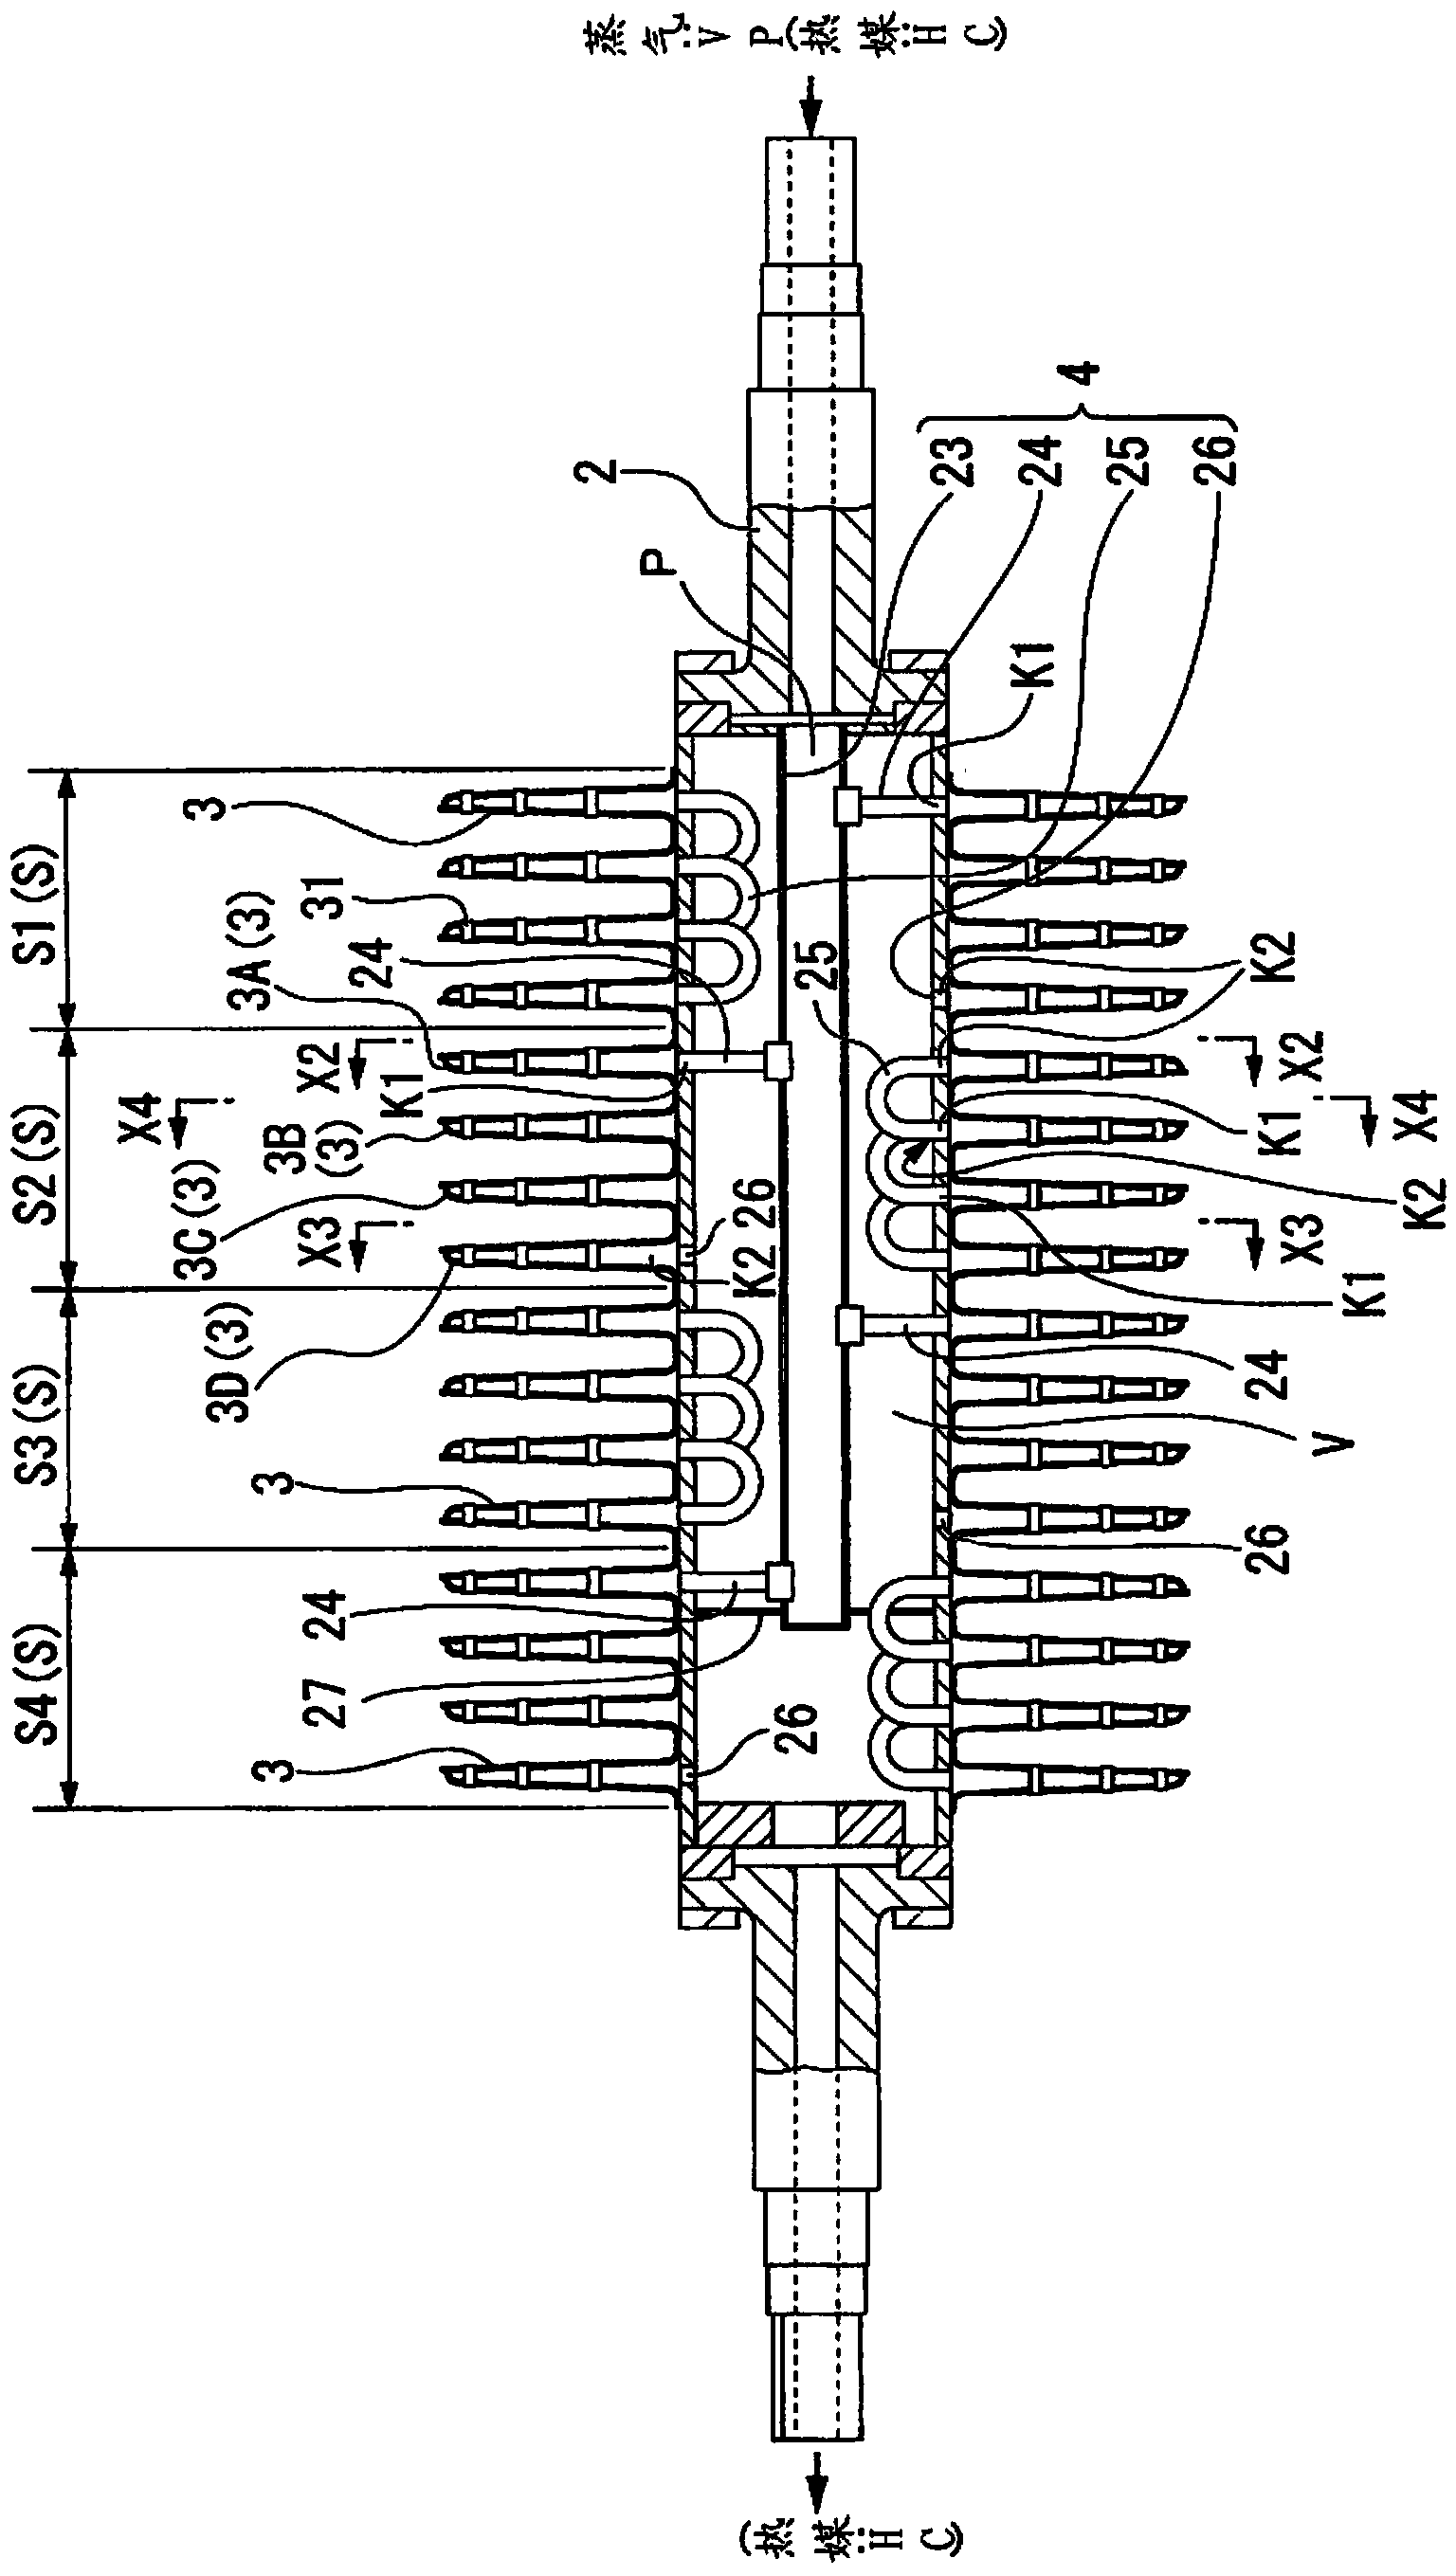 A disk-type stirring processing device